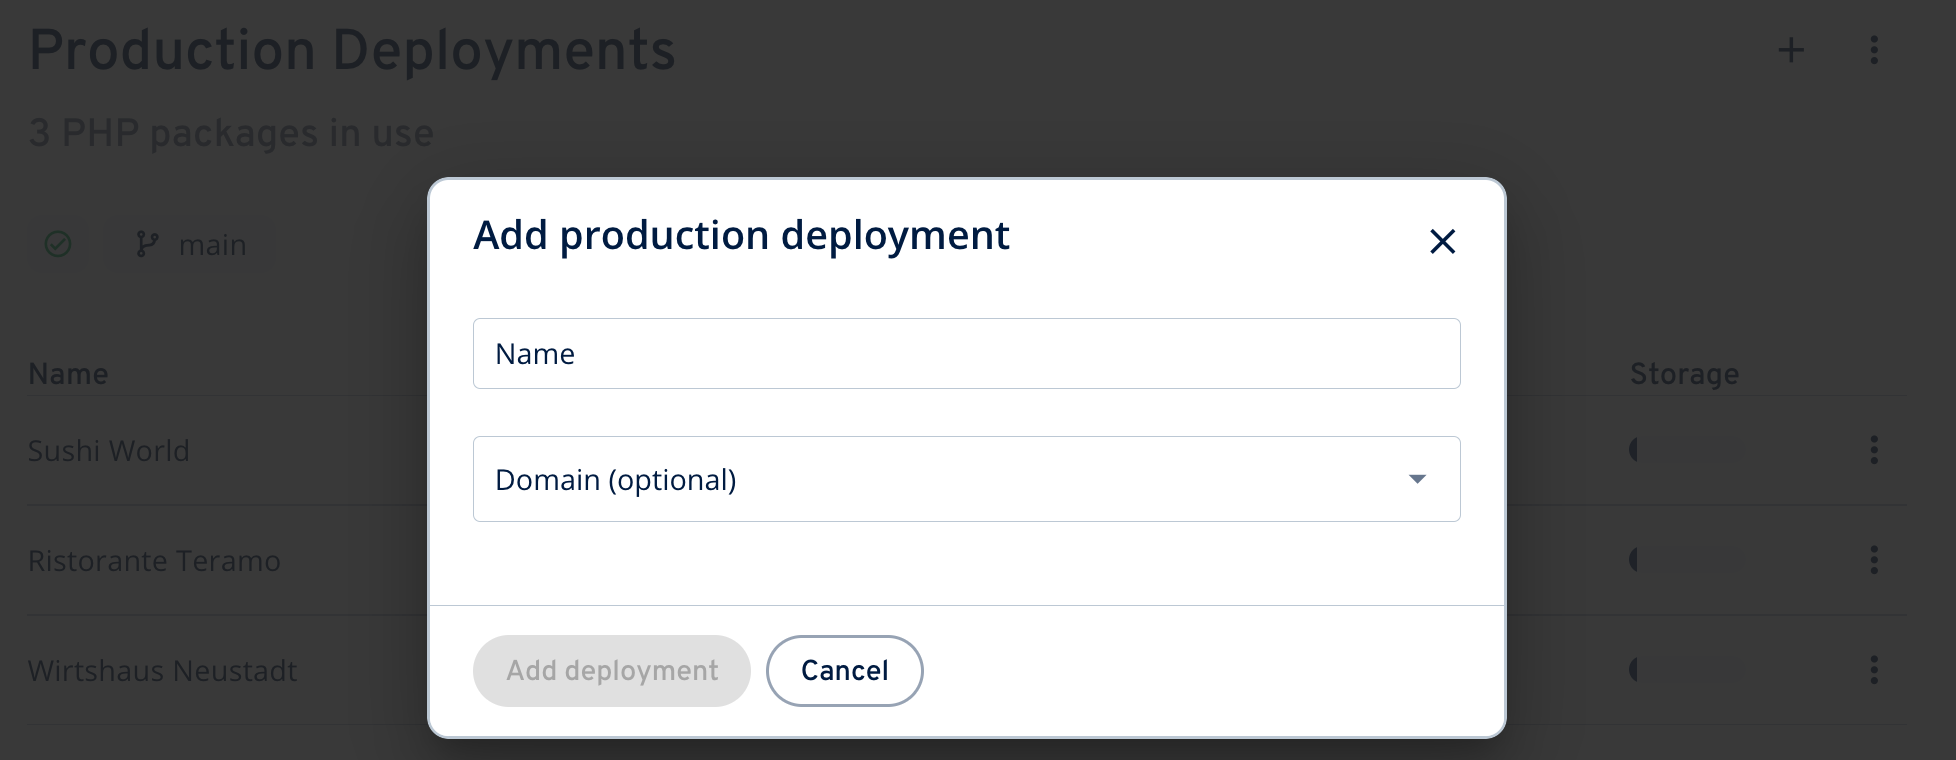 Adding a production deployment